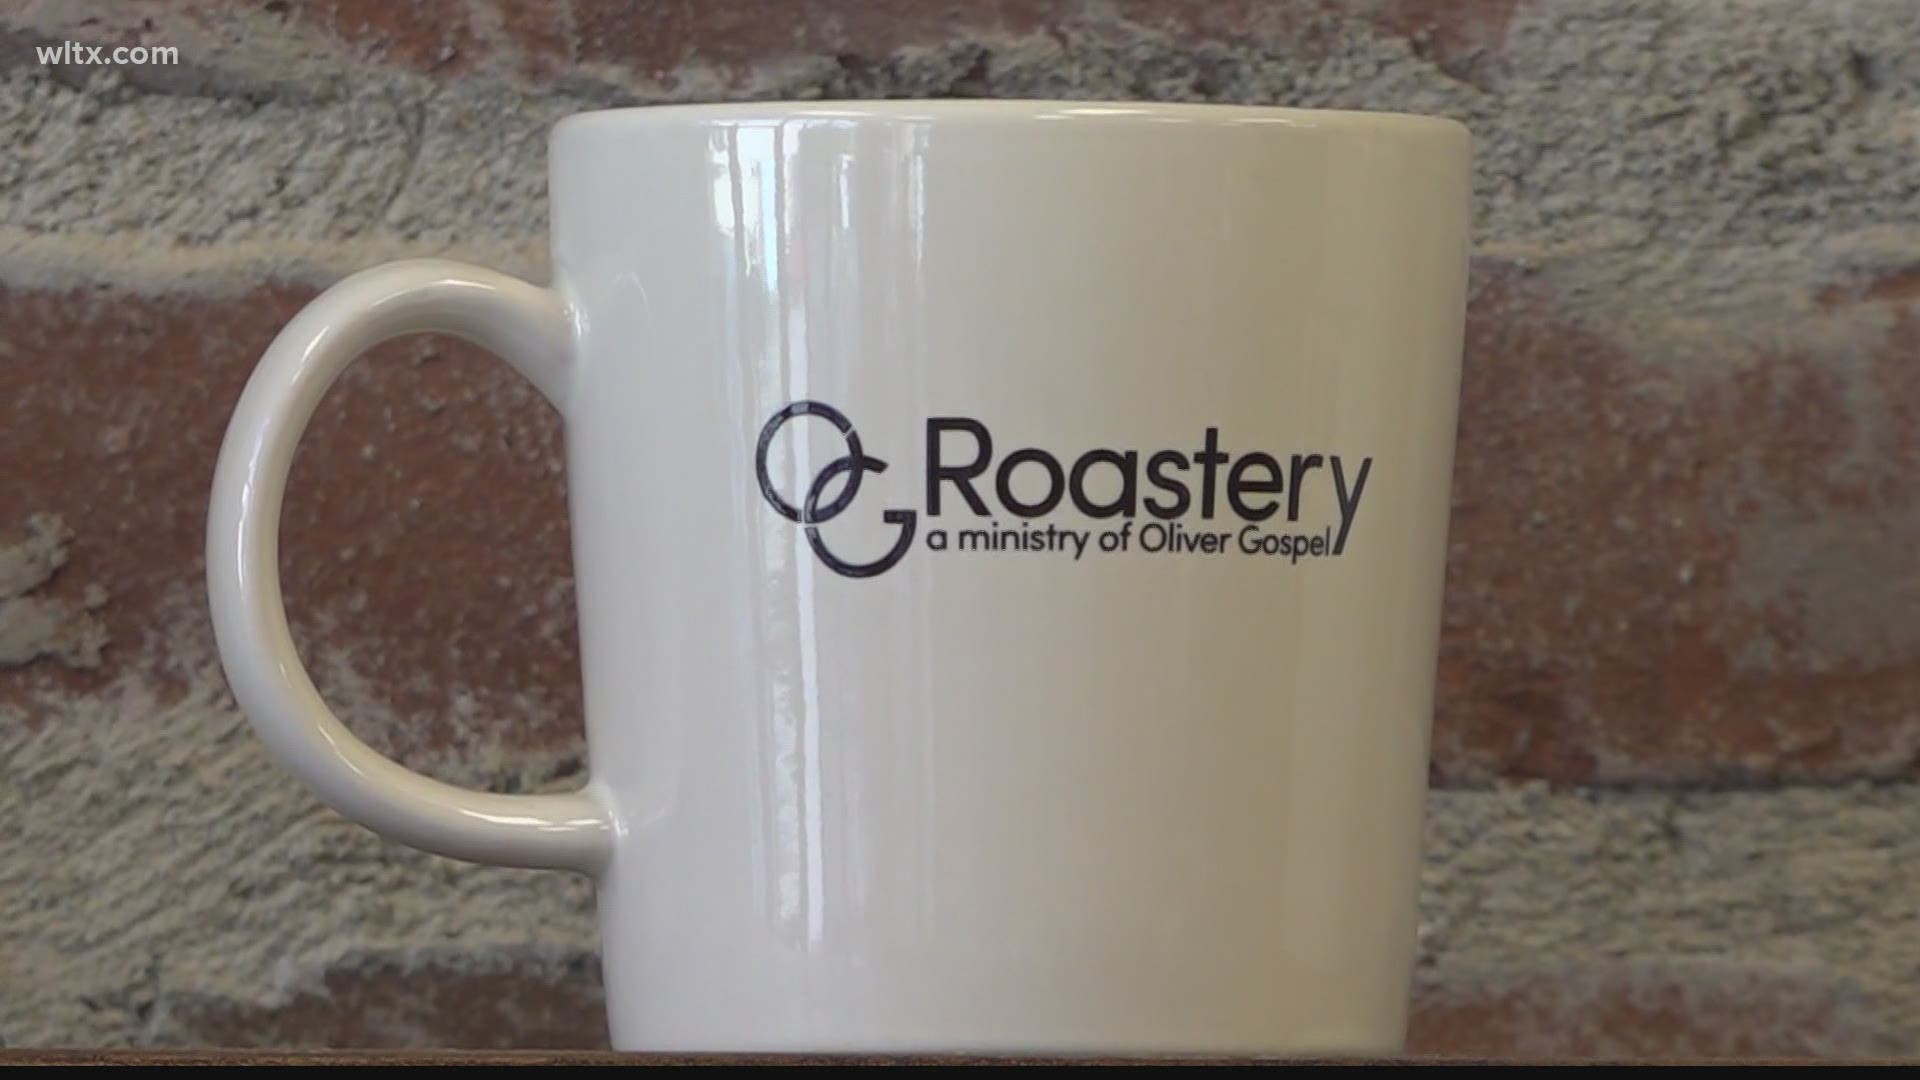 The Oliver Gospel Roastery opens Oct. 26 and will help clients get back on their feet and into the workforce.